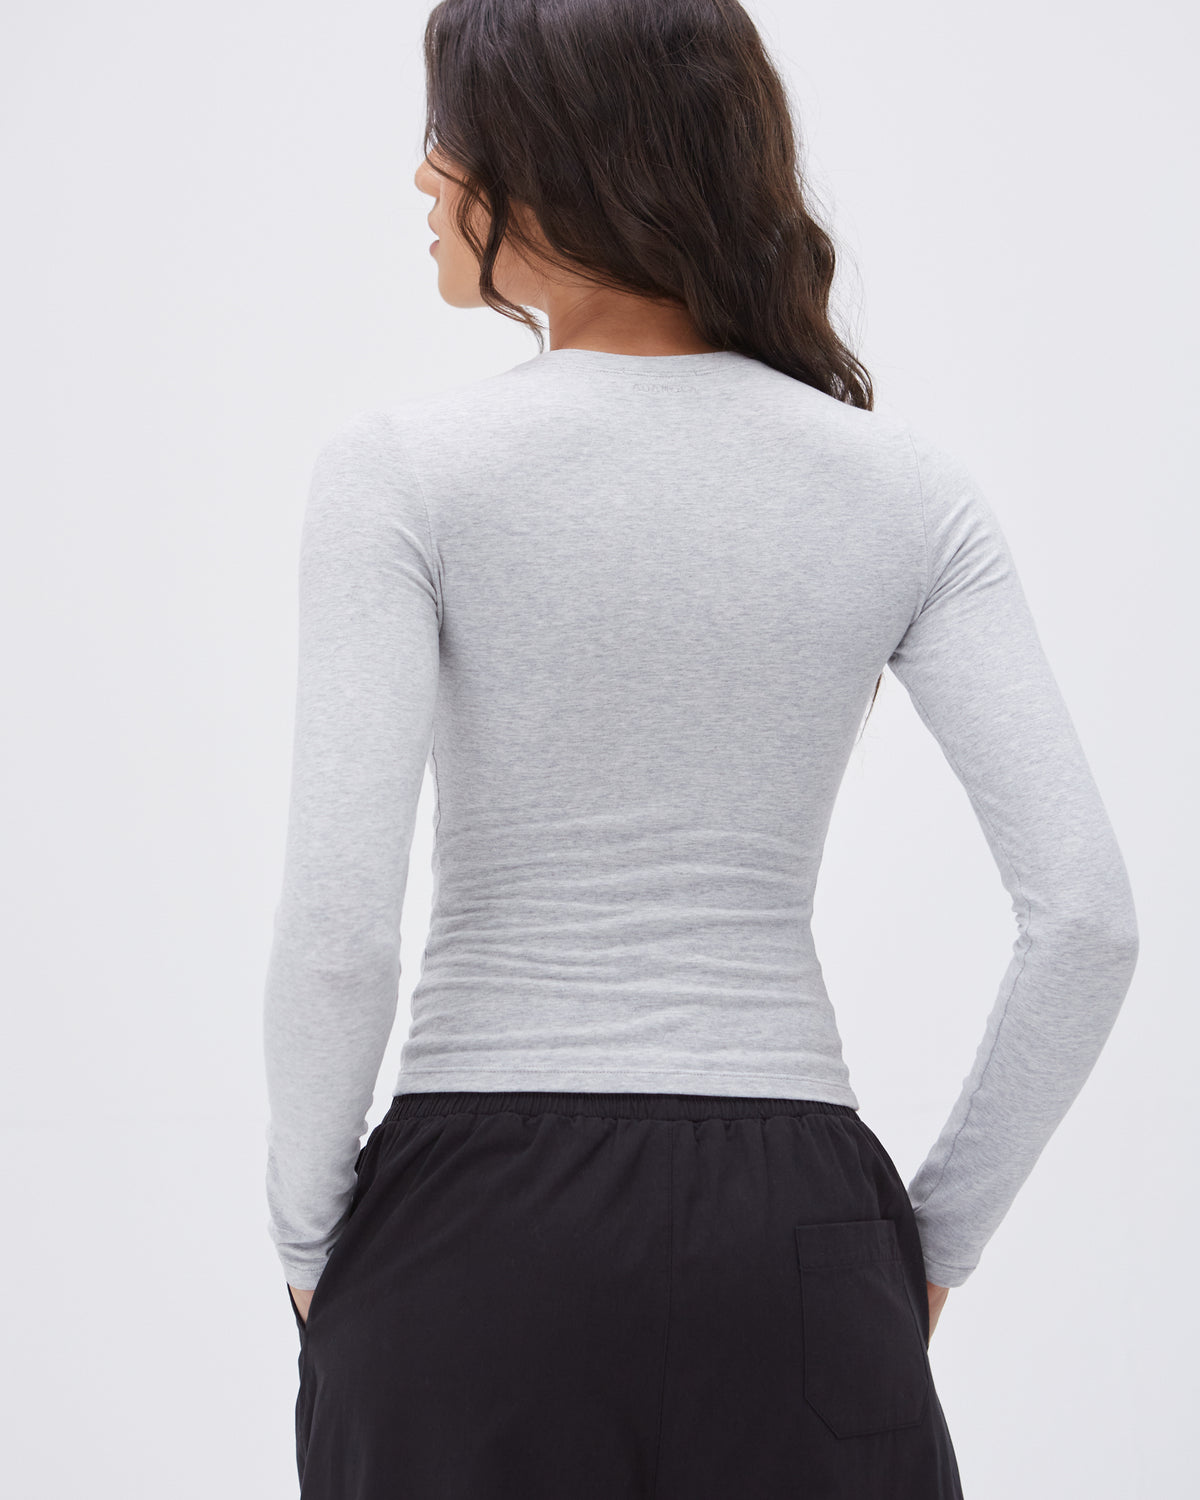 Women's Grey Fitted Long Sleeve Top